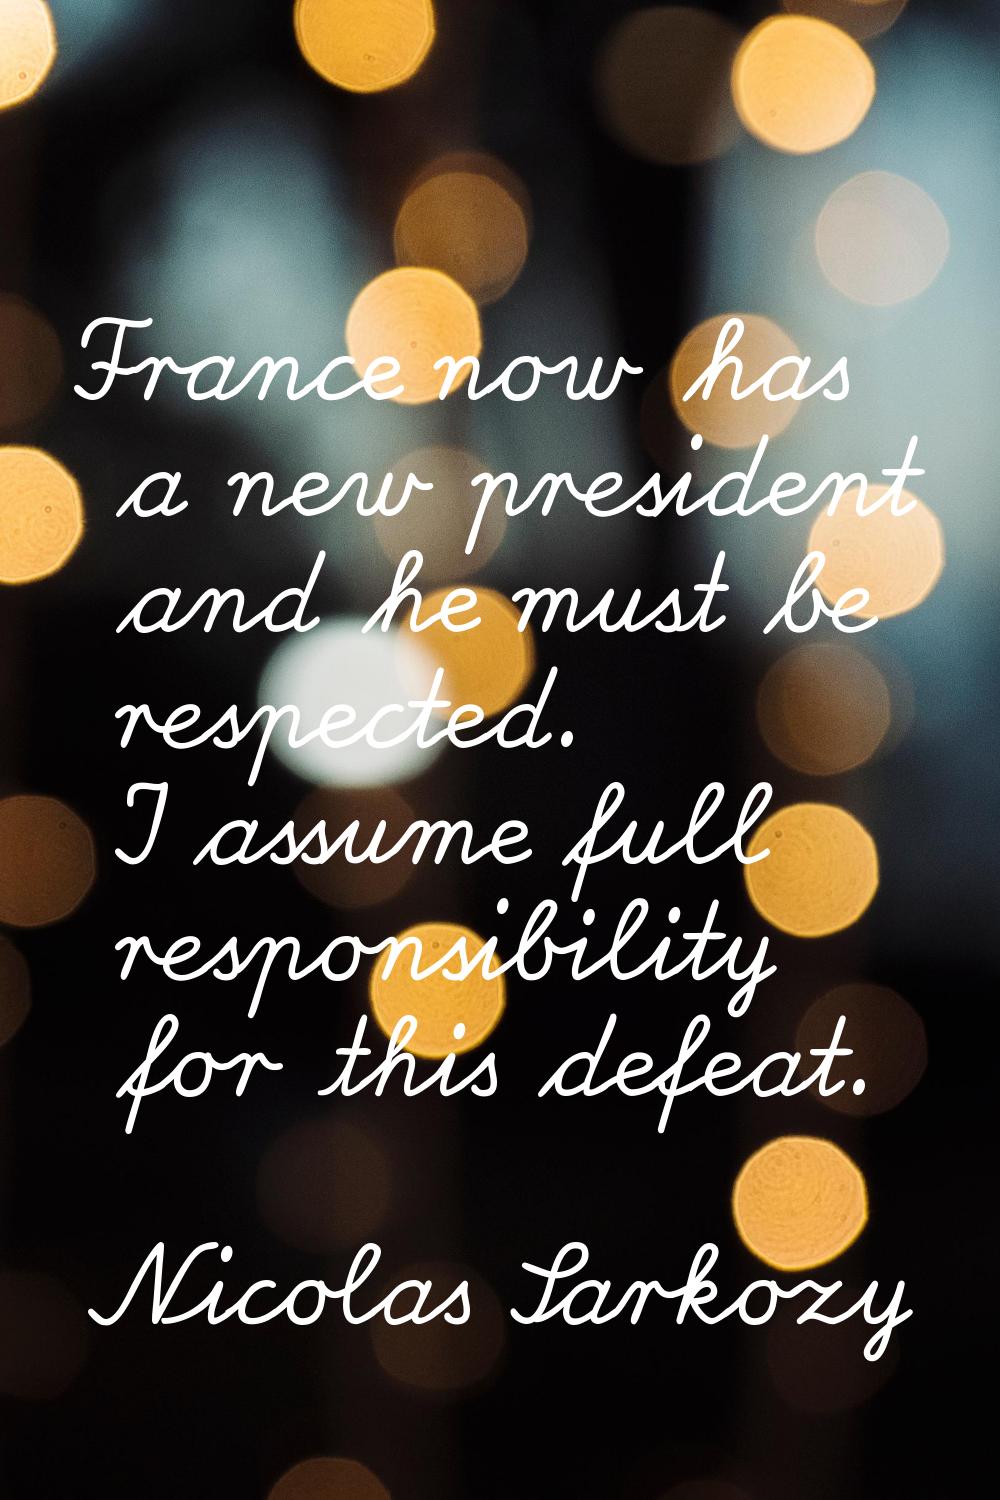 France now has a new president and he must be respected. I assume full responsibility for this defe